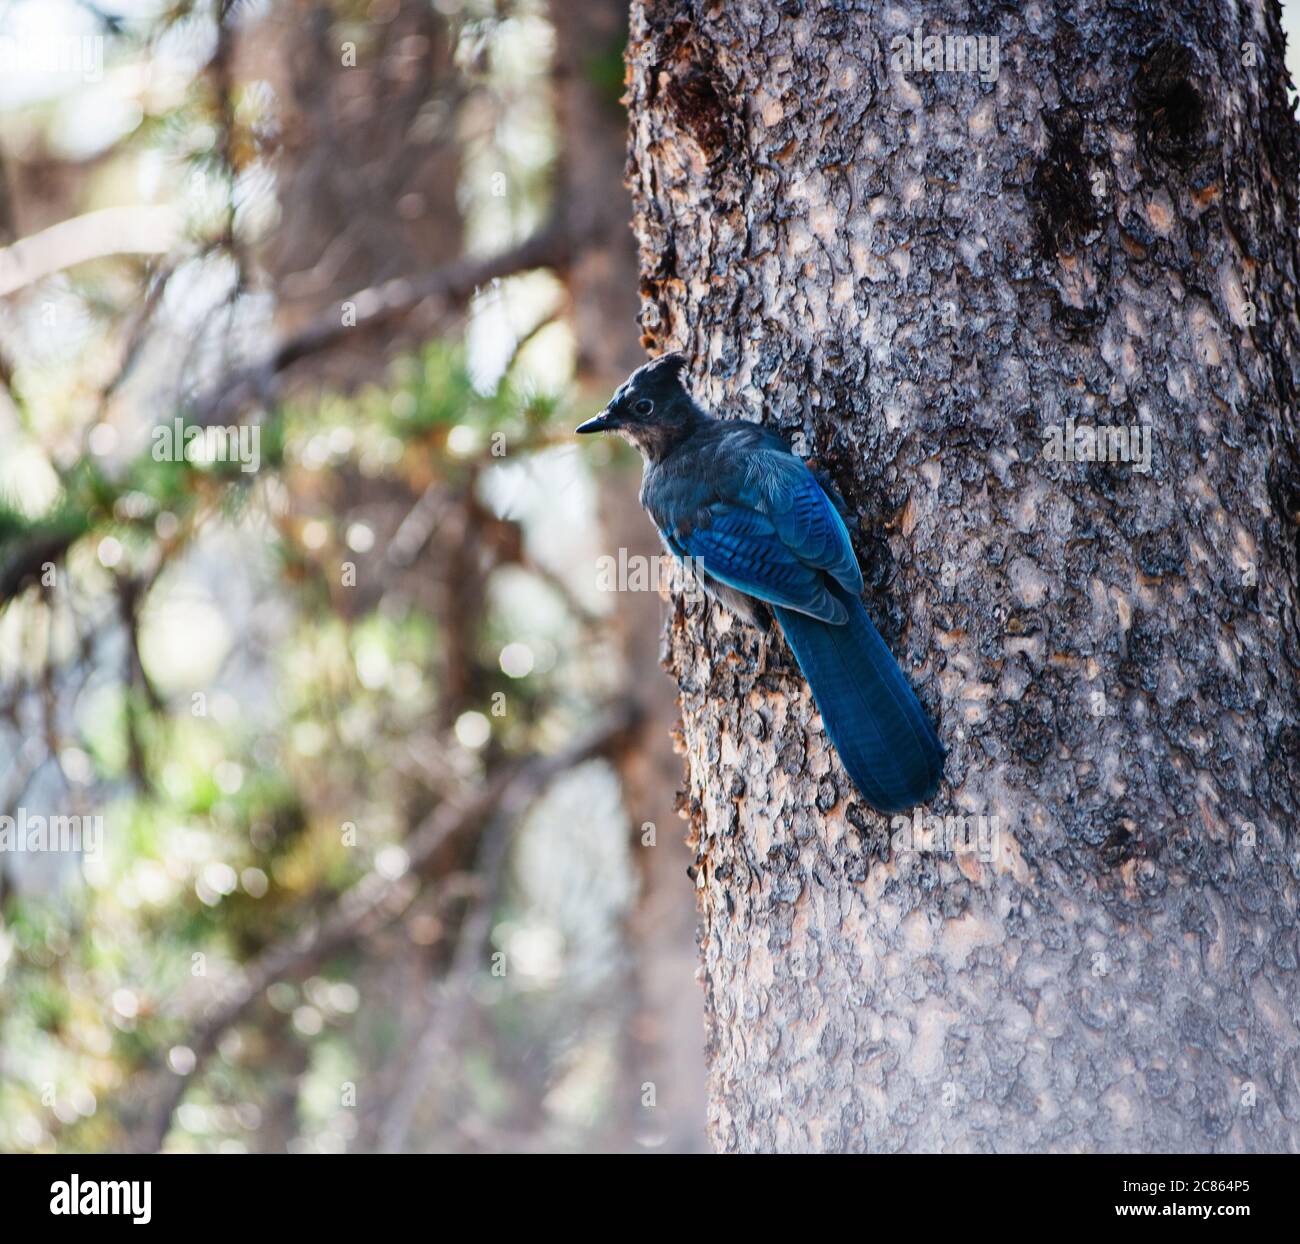 Blue jay in Yellowstone national park, Wyoming Stock Photo